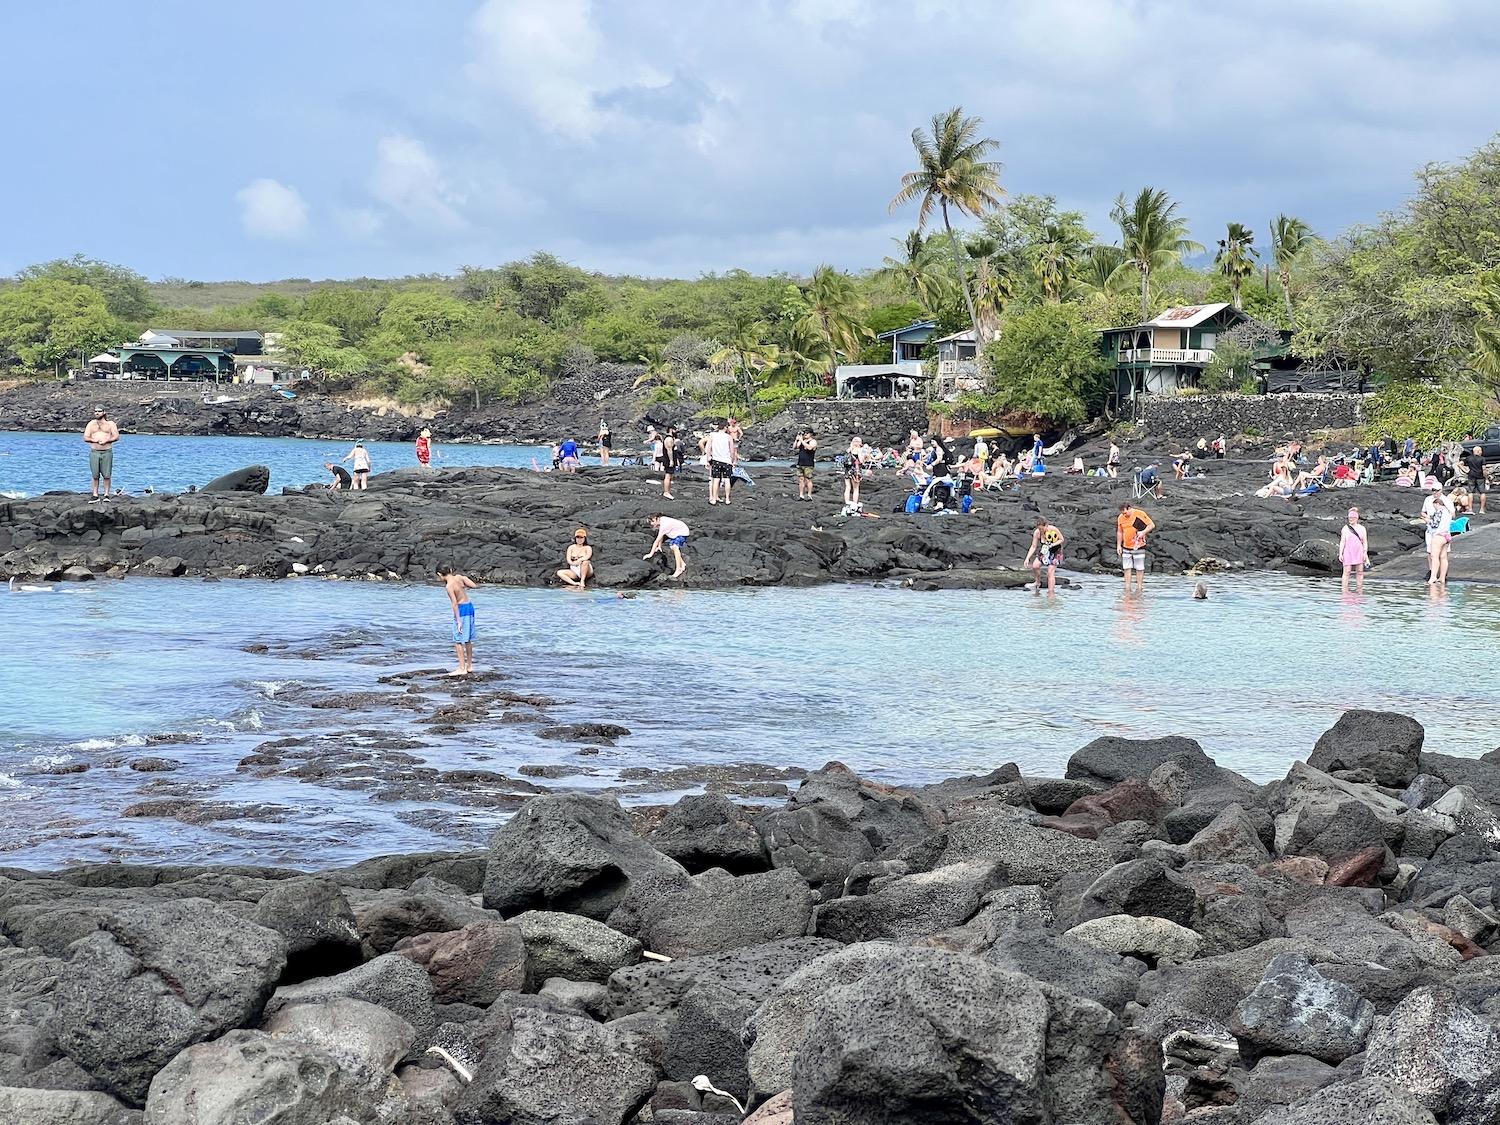 Standing in the national historical park, this is the view of the busy snorkel spot next door known as 2-Step (Two Step).